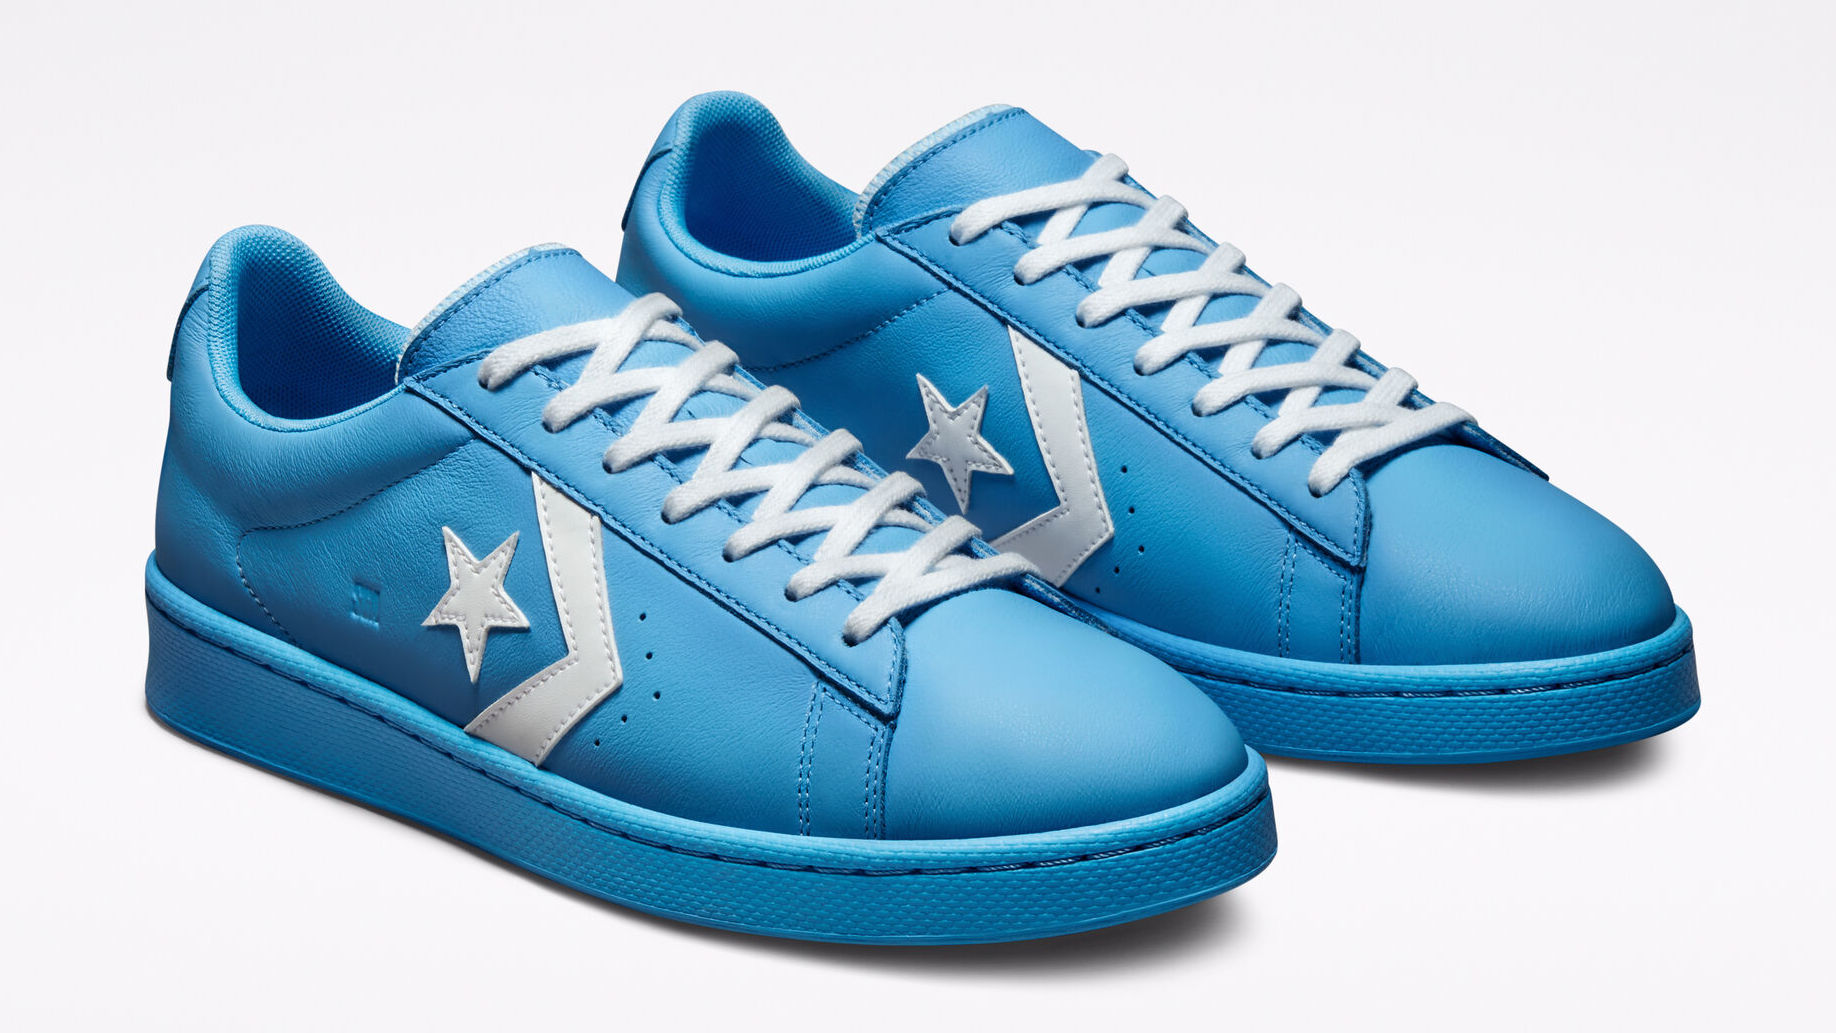 Shai Gilgeous-Alexander Returns With an Upscale Converse Pro Leather Ox